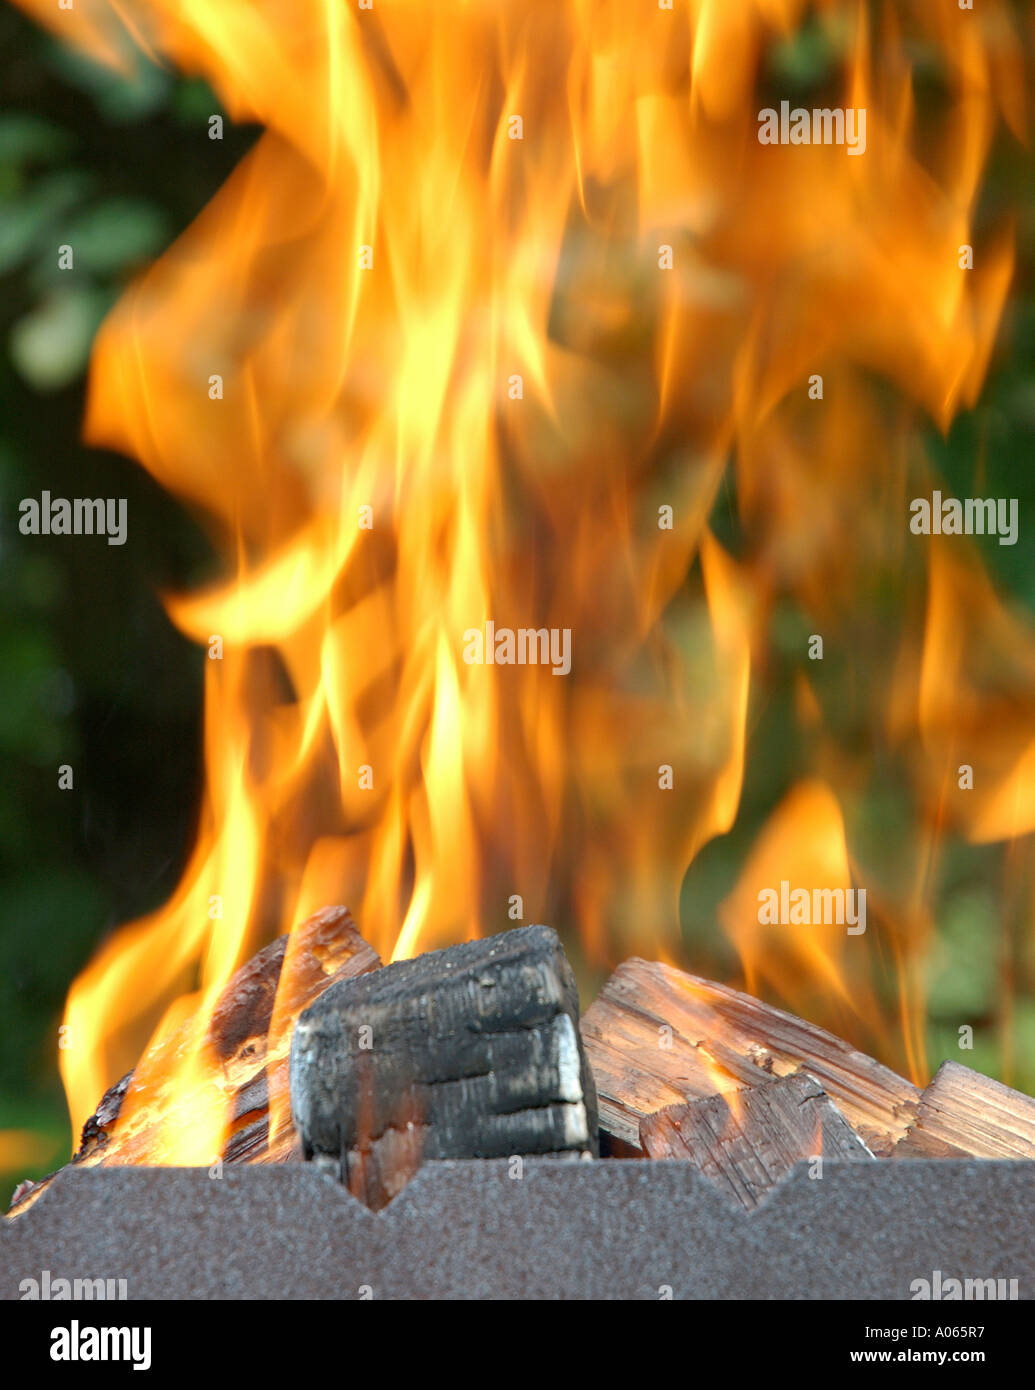 Front view of burning wood seen with bright flames Stock Photo